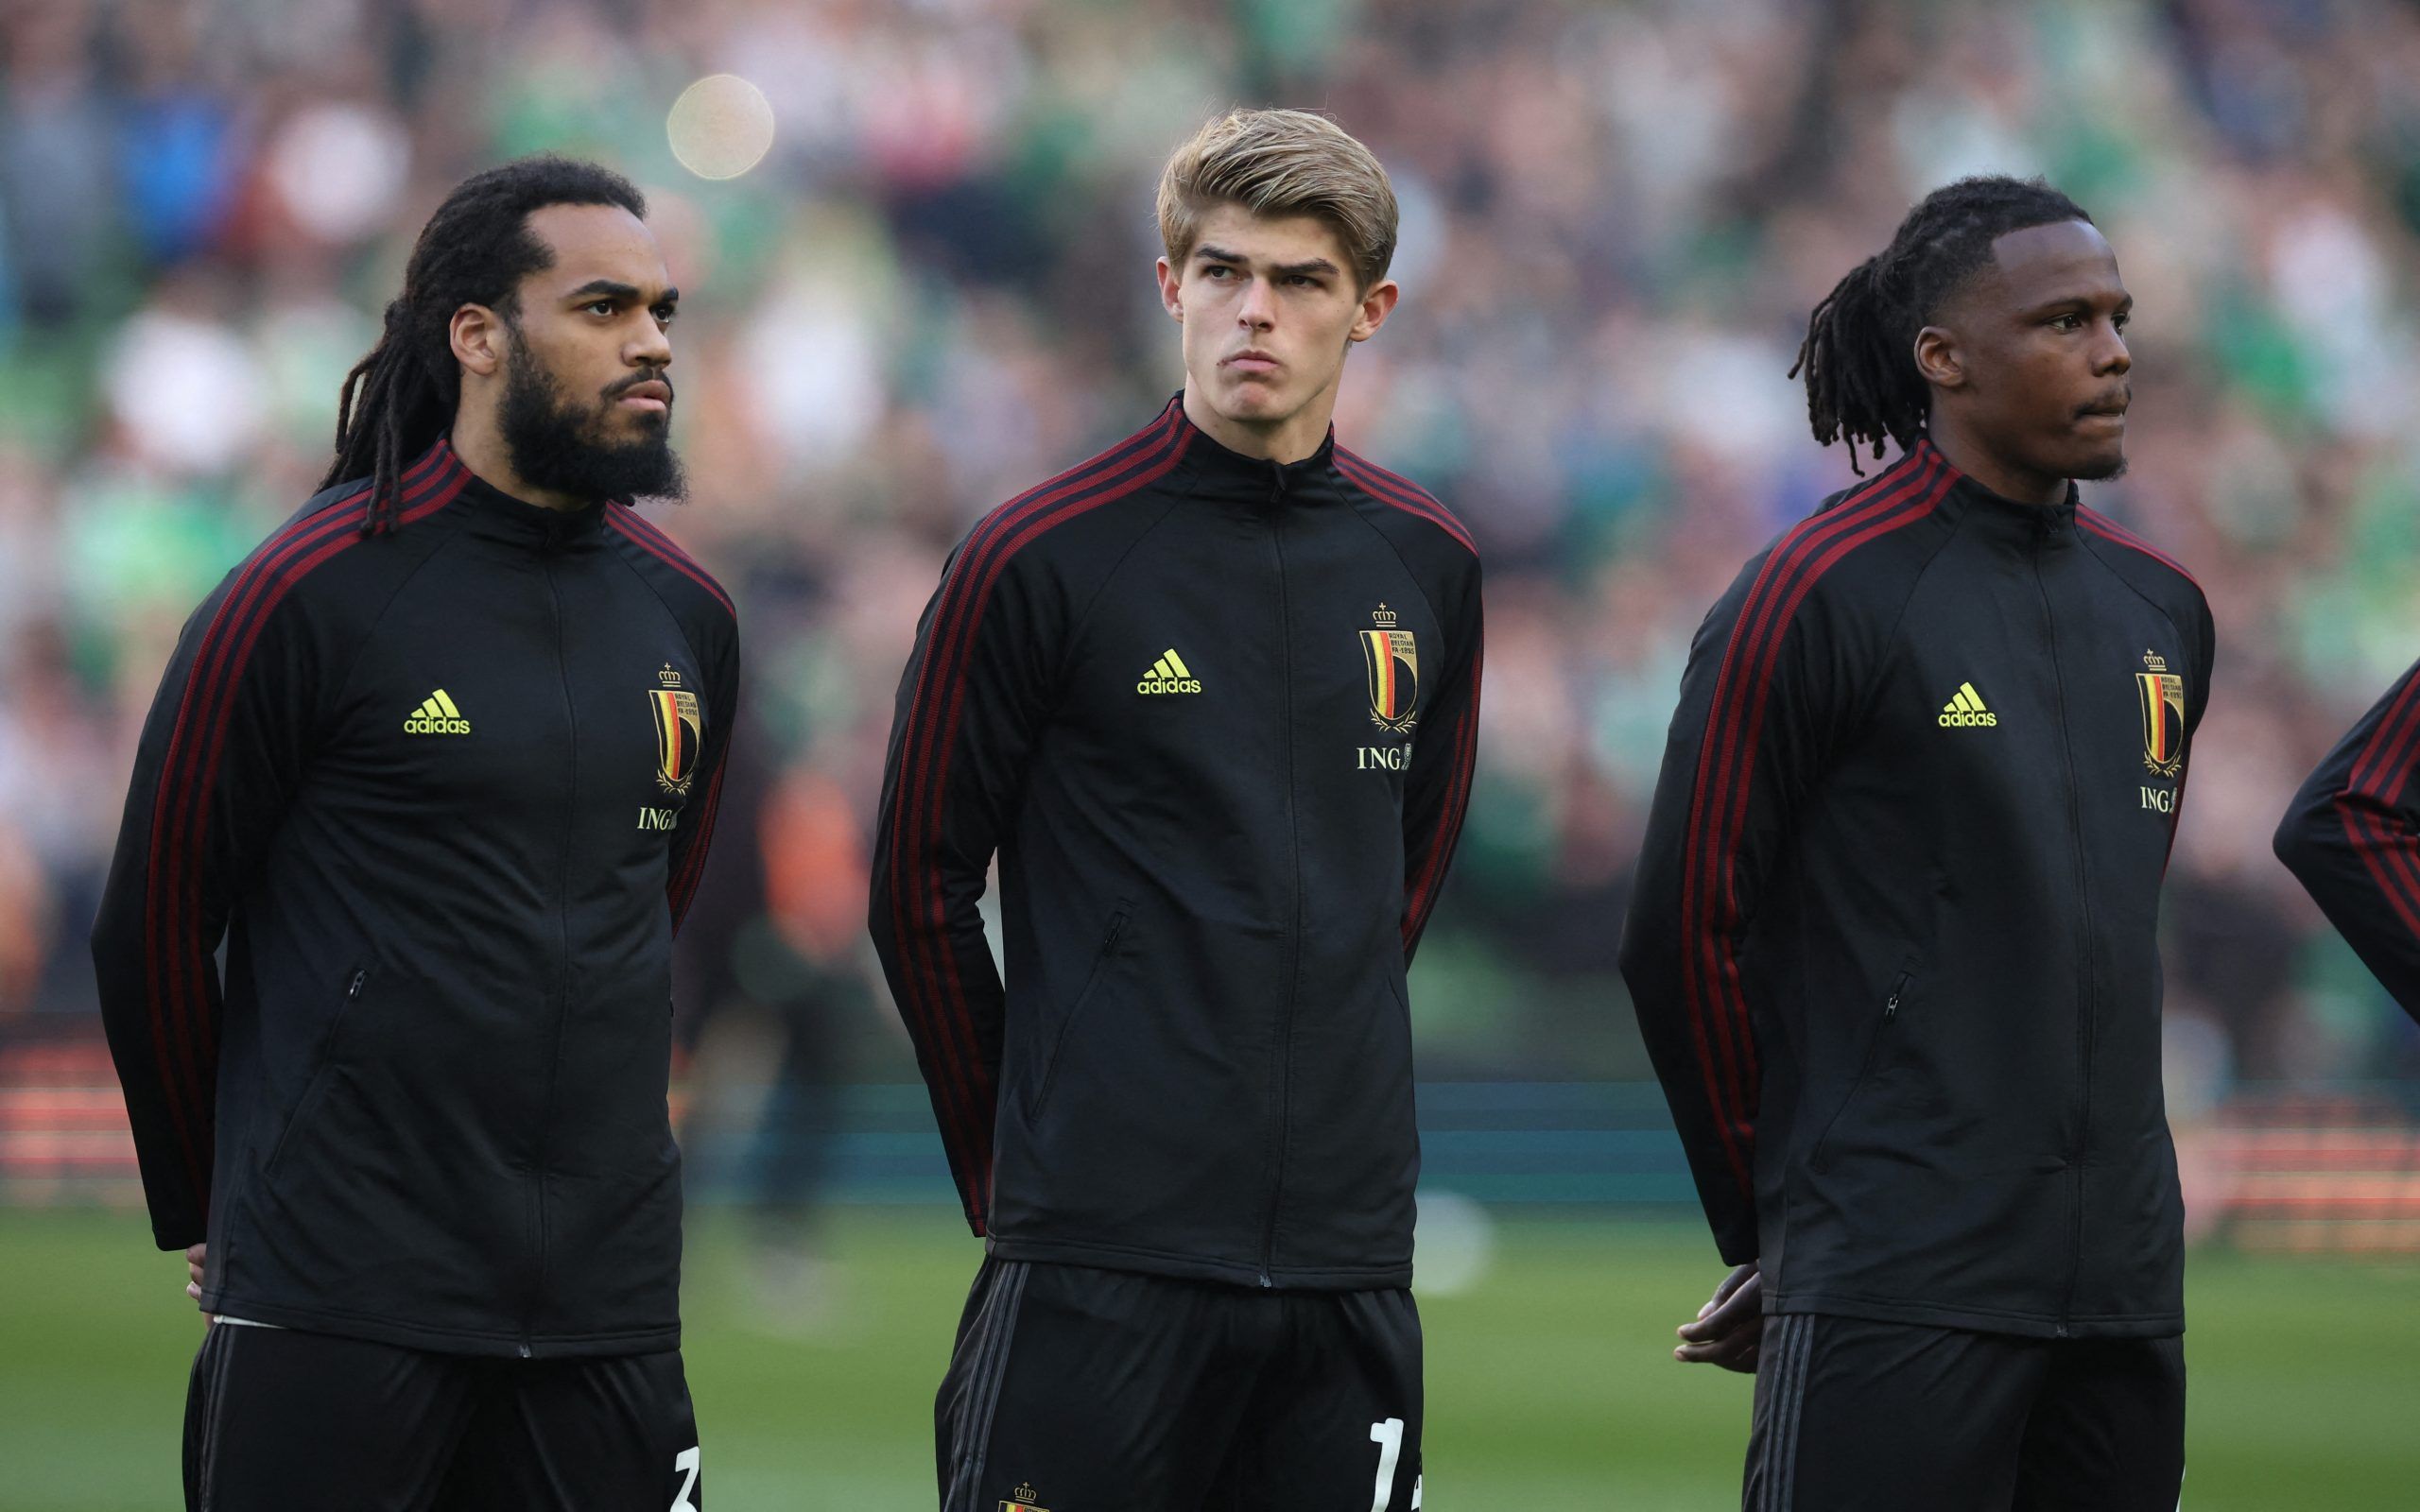 Soccer Football - International Friendly - Republic of Ireland v Belgium - Aviva Stadium, Dublin, Republic of Ireland - March 26, 2022 Belgium's Charles De Ketelaere with teammates line up during the national anthems before the match REUTERS/Phil Noble